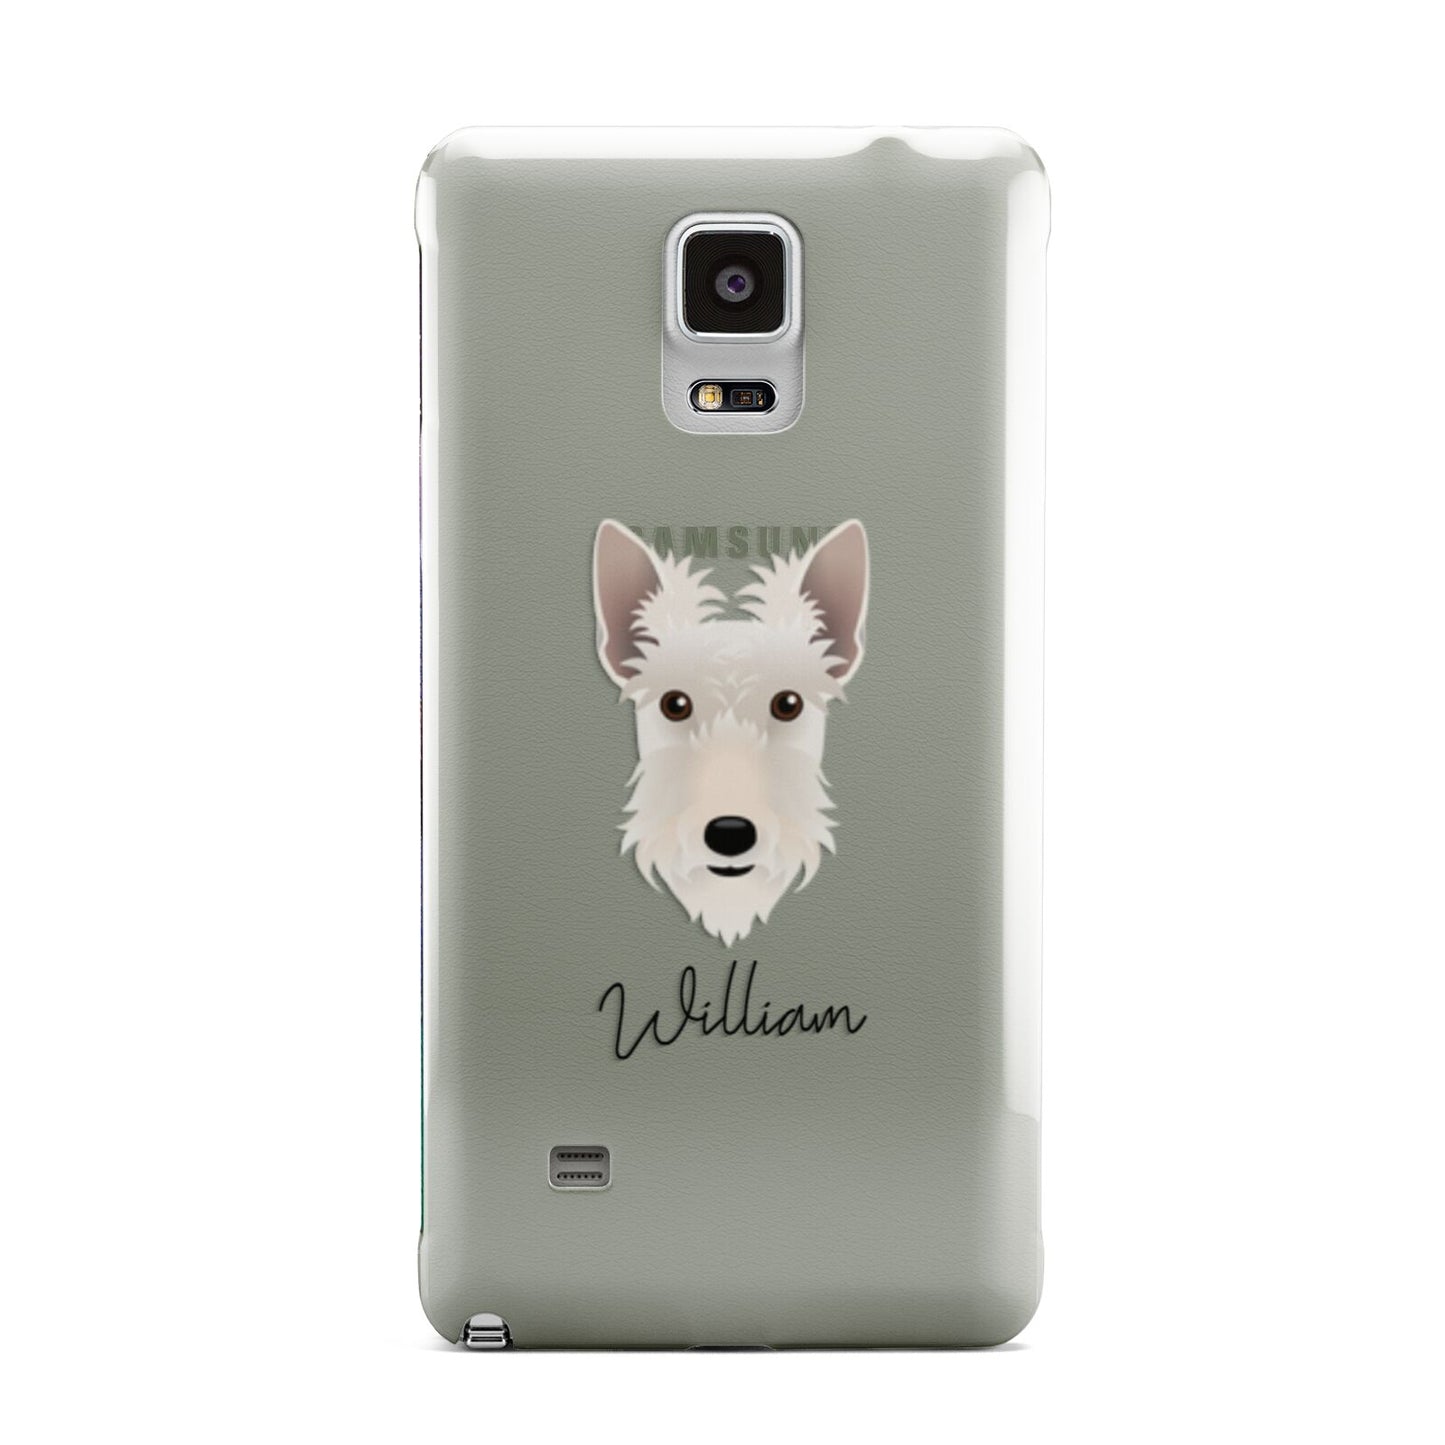 Scottish Terrier Personalised Samsung Galaxy Note 4 Case